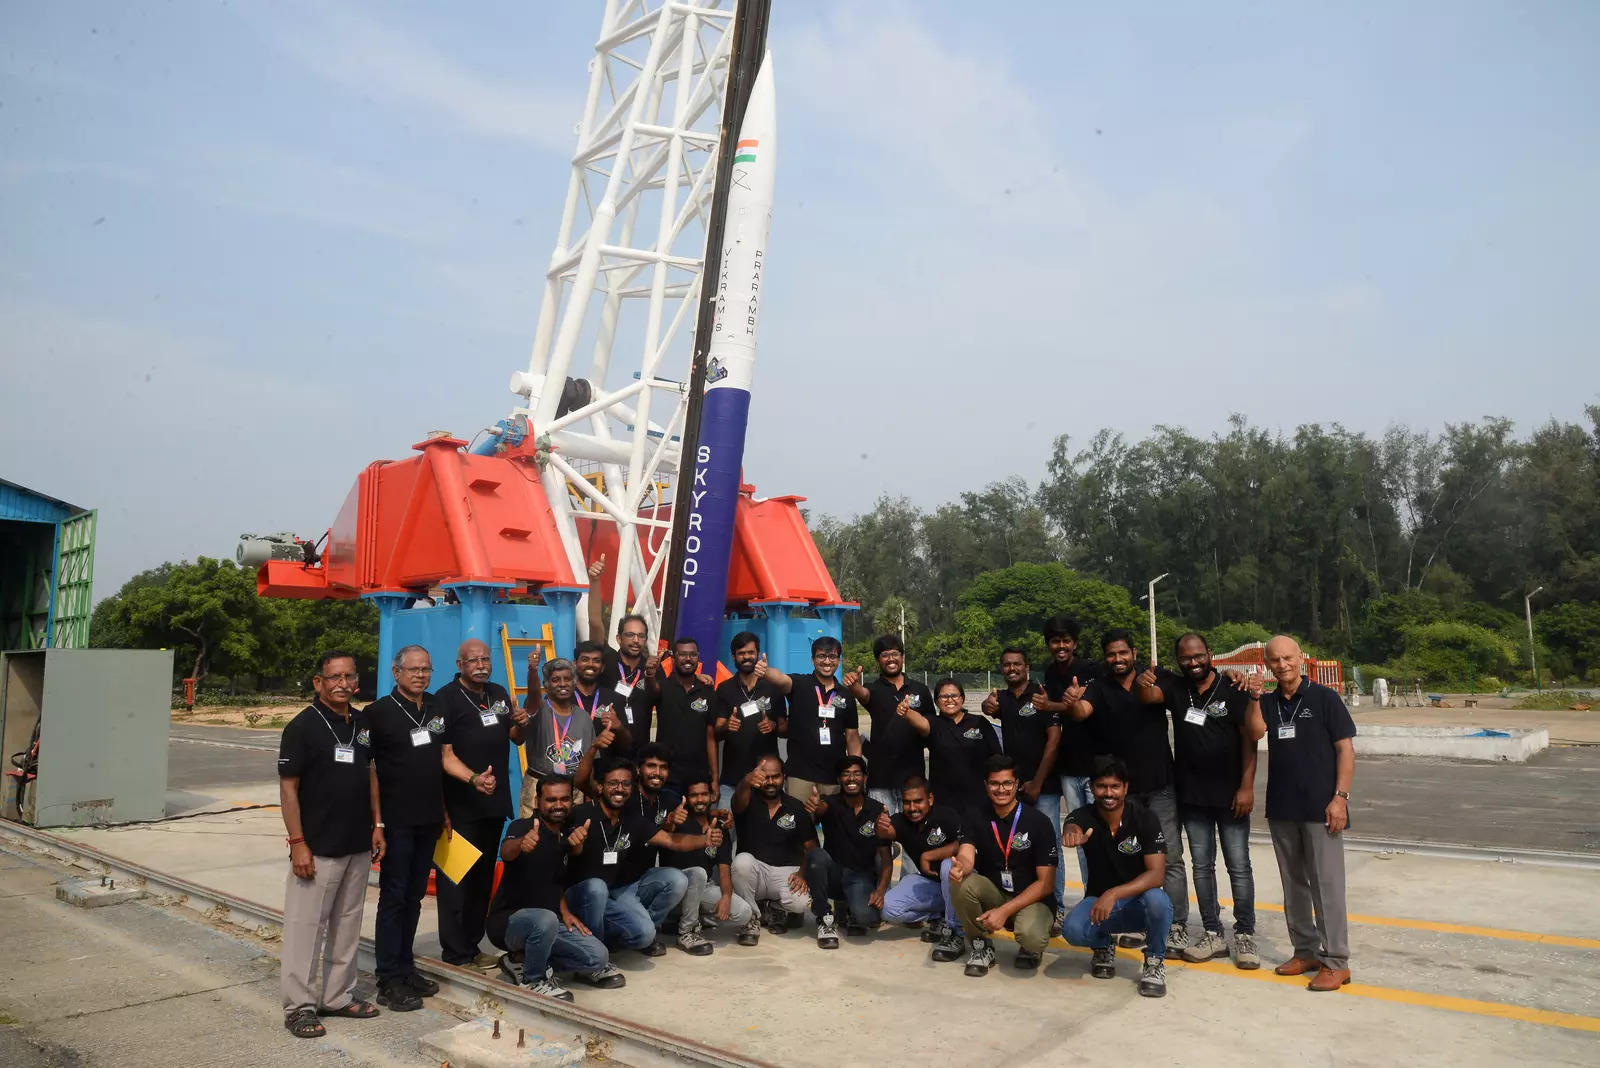 Employees pose in front of Vikram-S rocket, India's first private rocket developed by Skyroot, an Indian Space-Tech startup at a spaceport in Sriharikota 